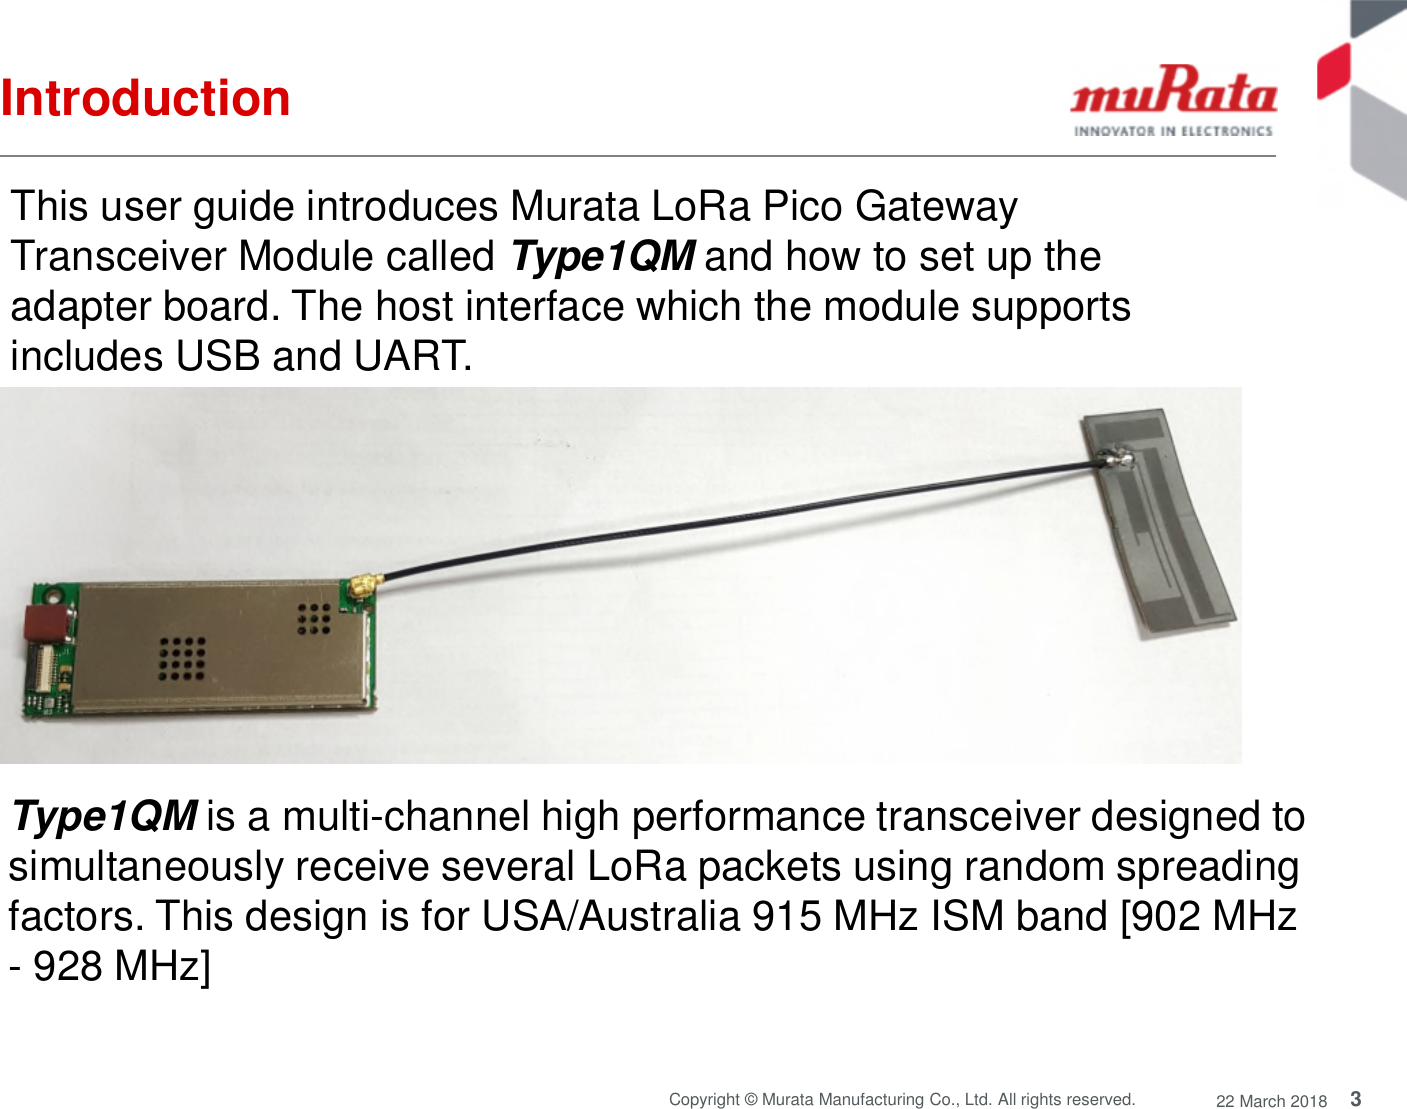 3Copyright © Murata Manufacturing Co., Ltd. All rights reserved. 22 March 2018IntroductionThis user guide introduces Murata LoRa Pico GatewayTransceiver Module called Type1QM and how to set up theadapter board. The host interface which the module supportsincludes USB and UART.Type1QM is a multi-channel high performance transceiver designed tosimultaneously receive several LoRa packets using random spreadingfactors. This design is for USA/Australia 915 MHz ISM band [902 MHz- 928 MHz]